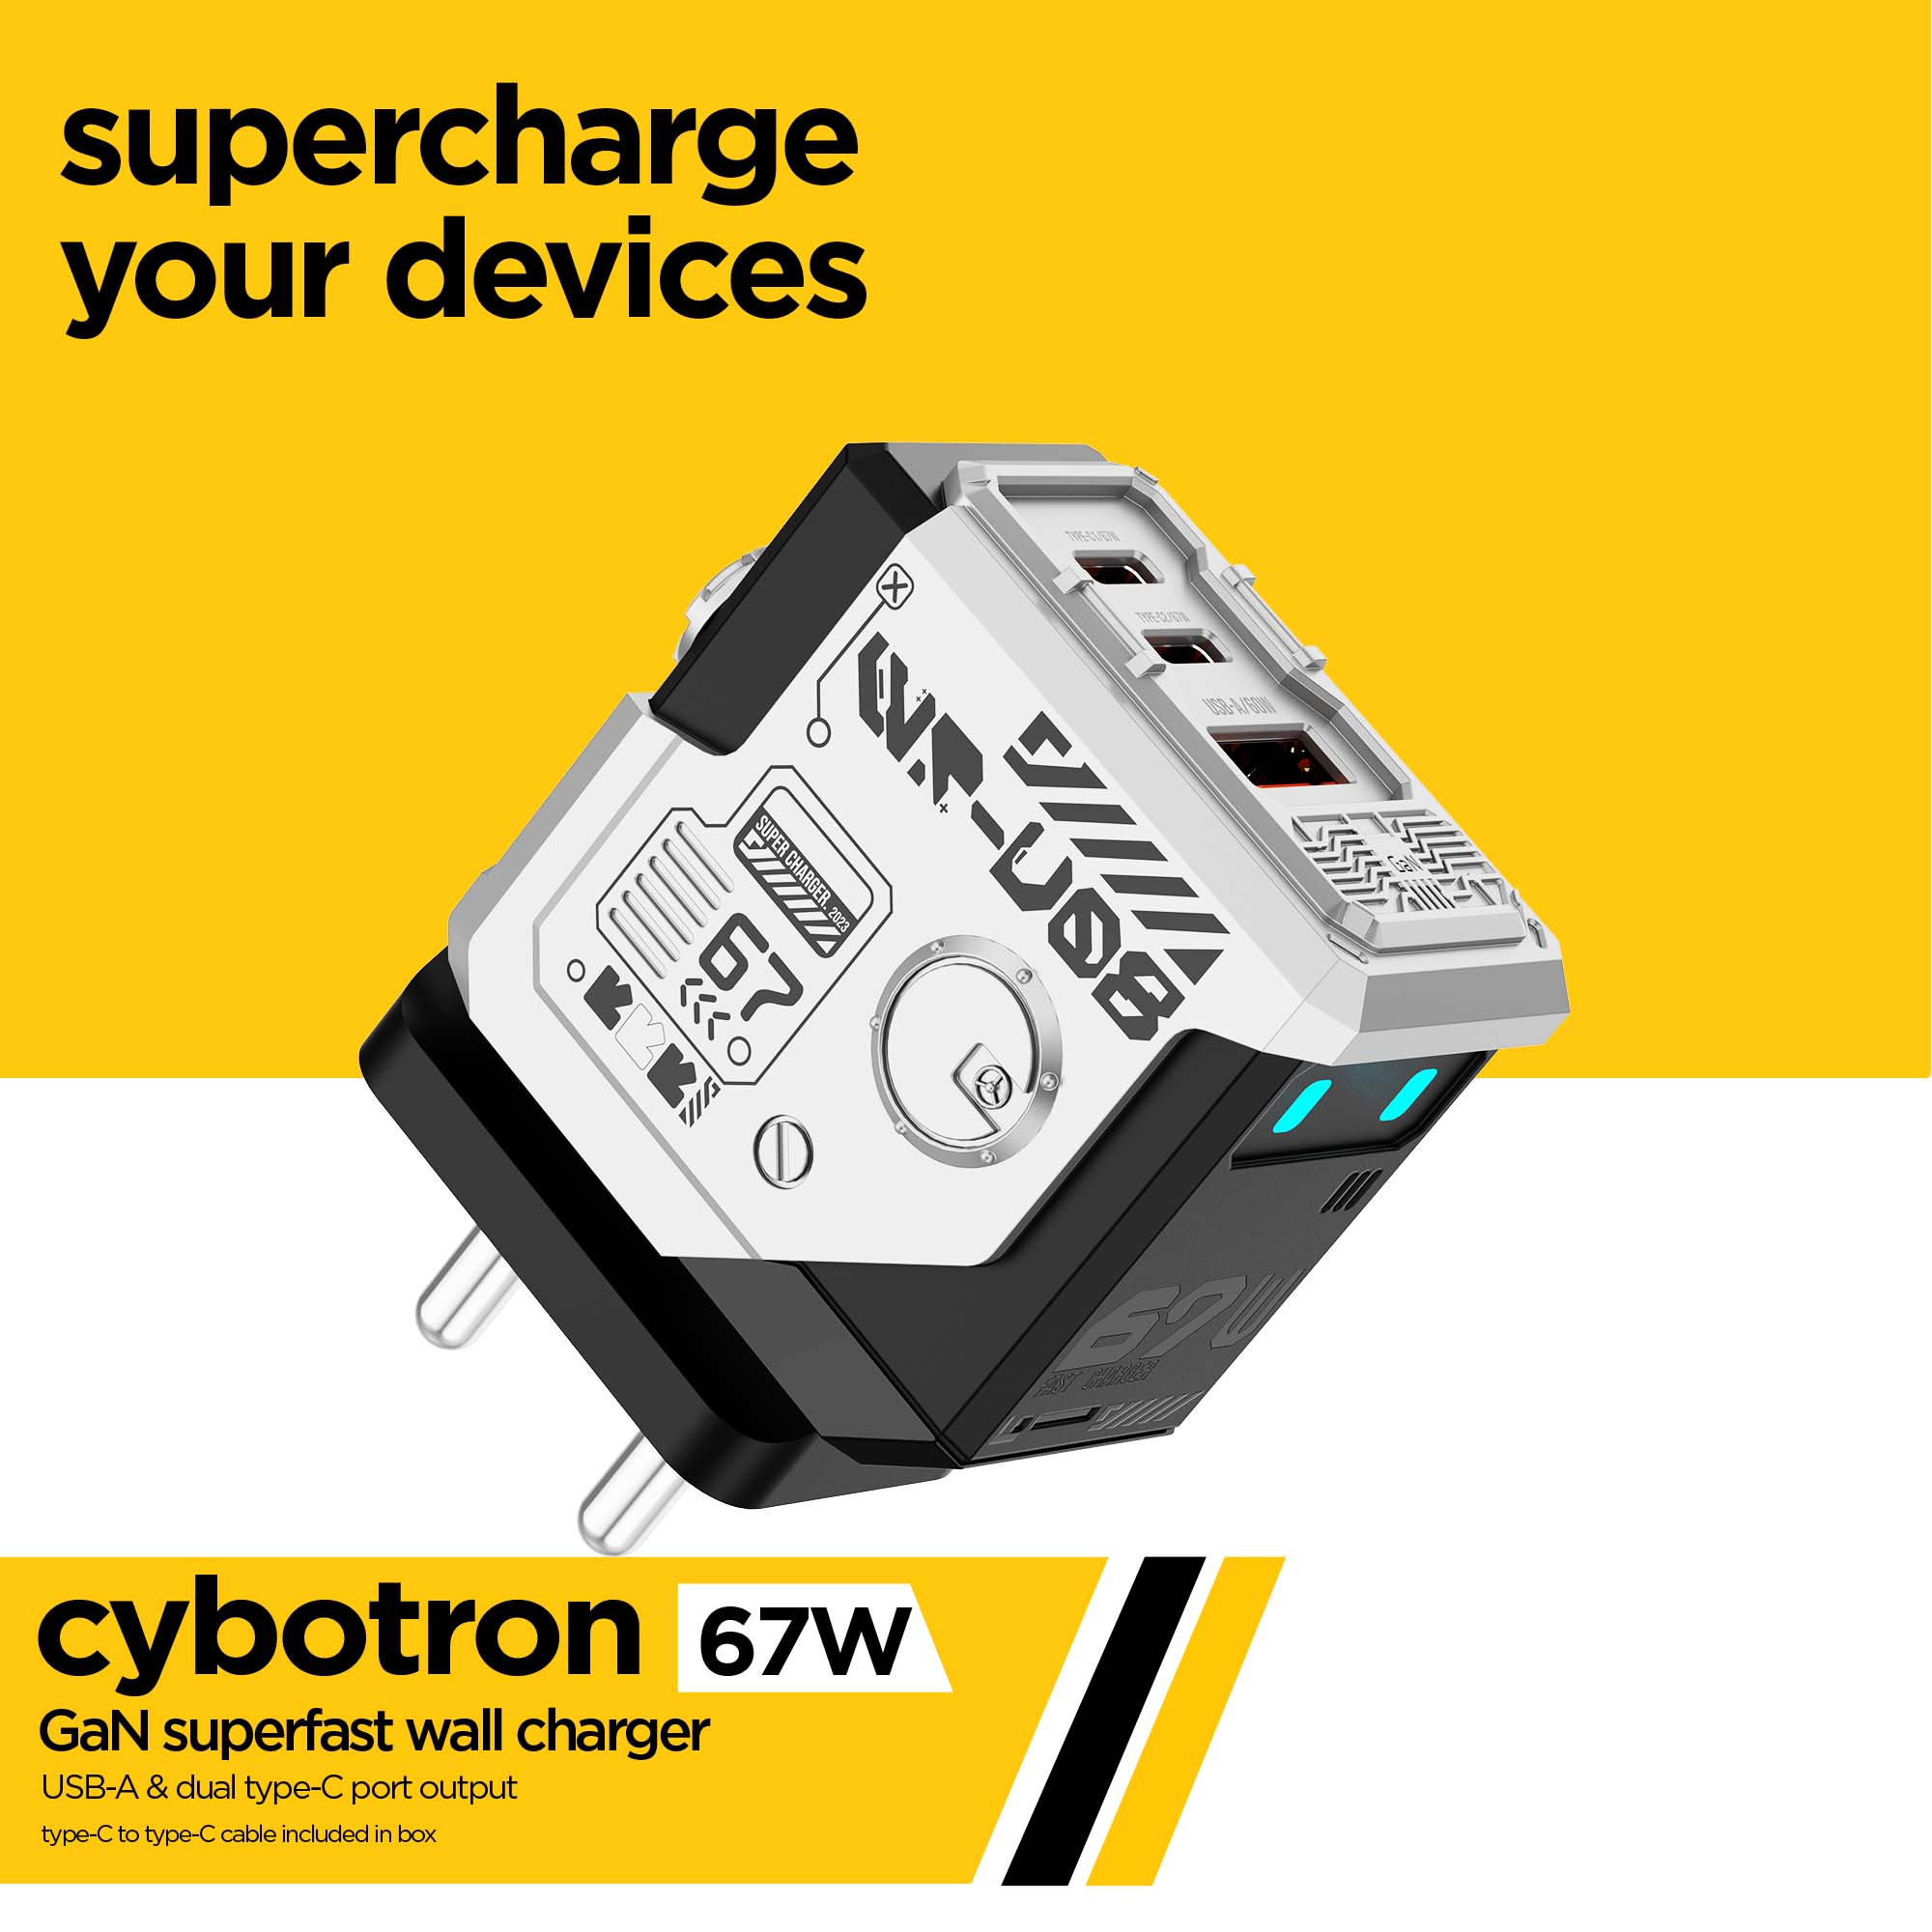 Cybotron 67W GaN Superfast Wall Charger Silver